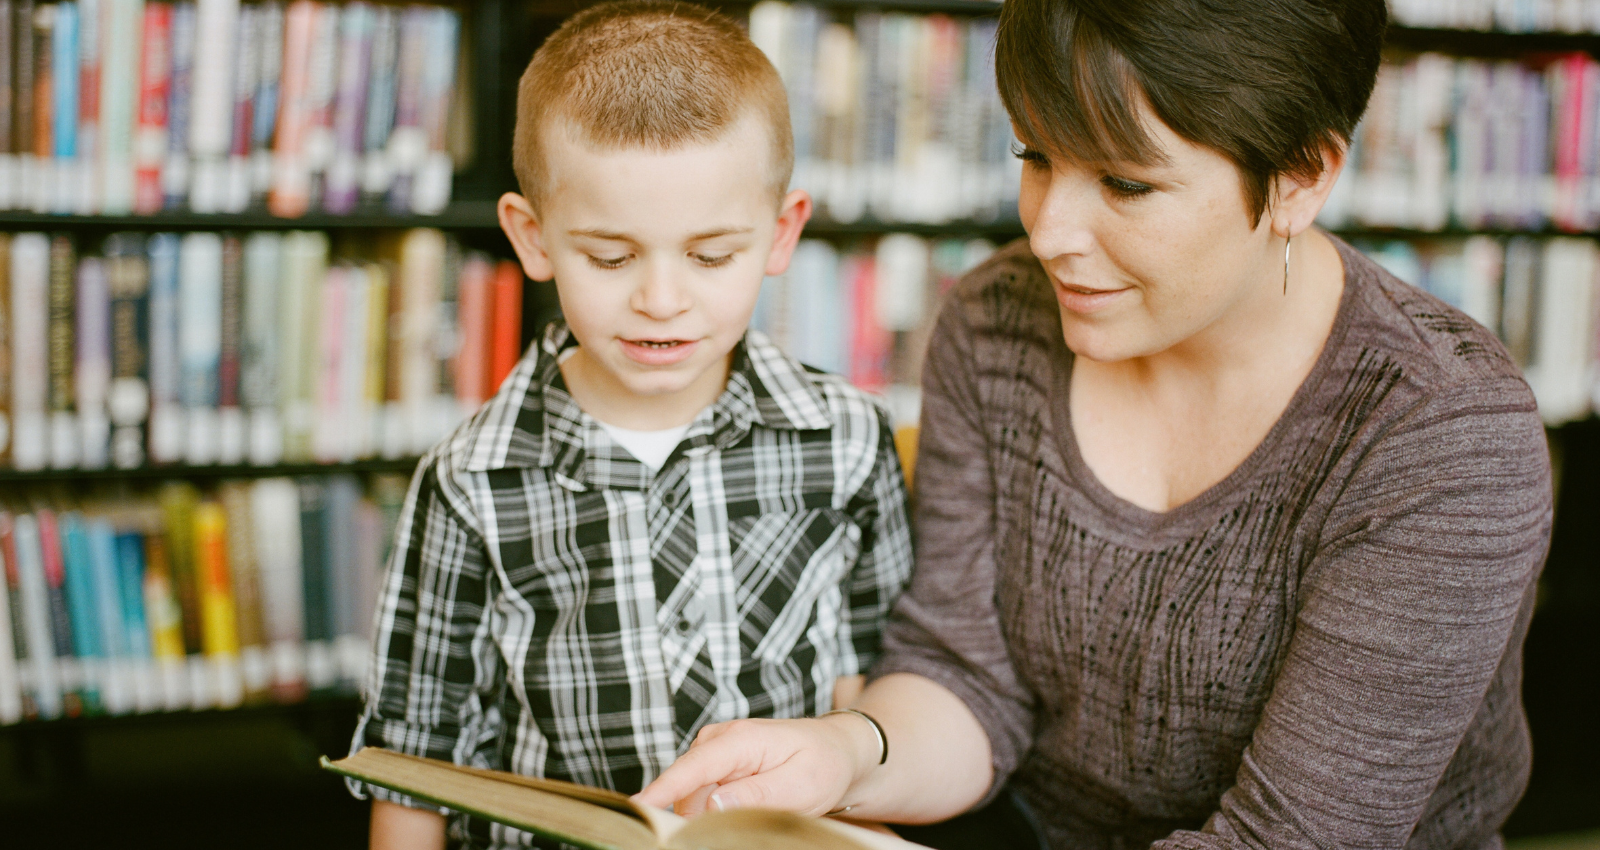 child being read to by woman in library